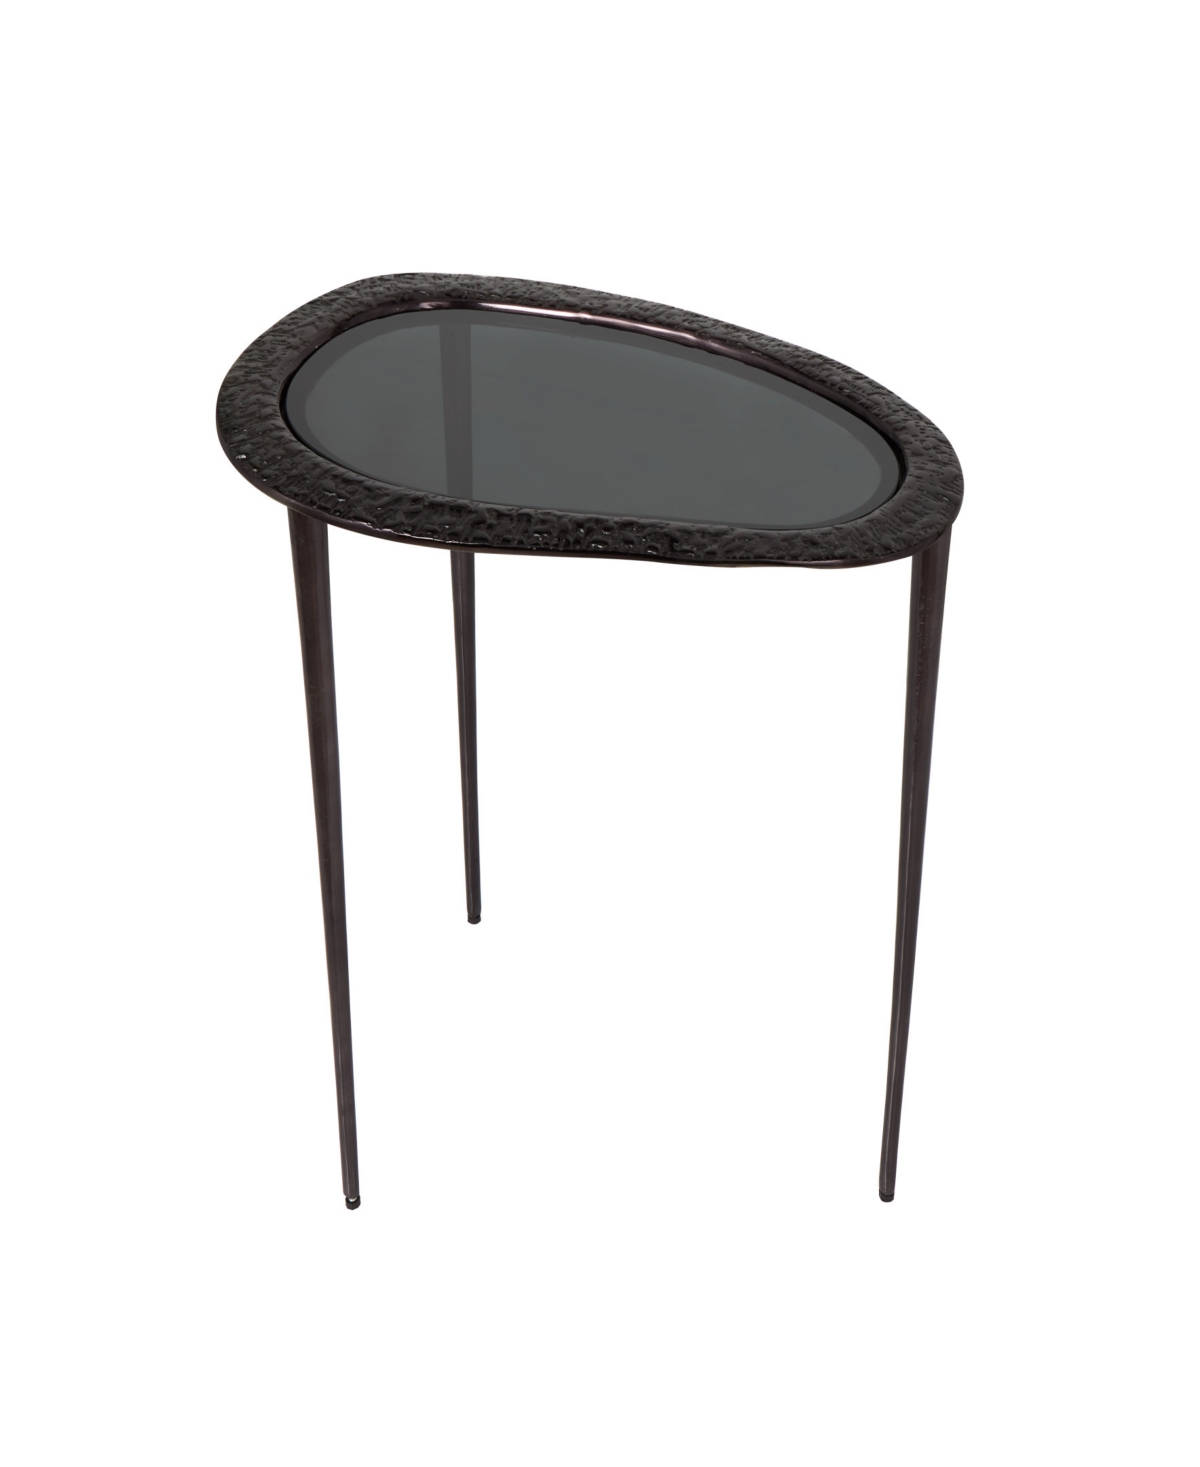 Rosemary Lane 23" X 15" X 23" Aluminum Abstract Oval Shaped Shaded Glass Top And Detailed Engravings Accent Table In Black